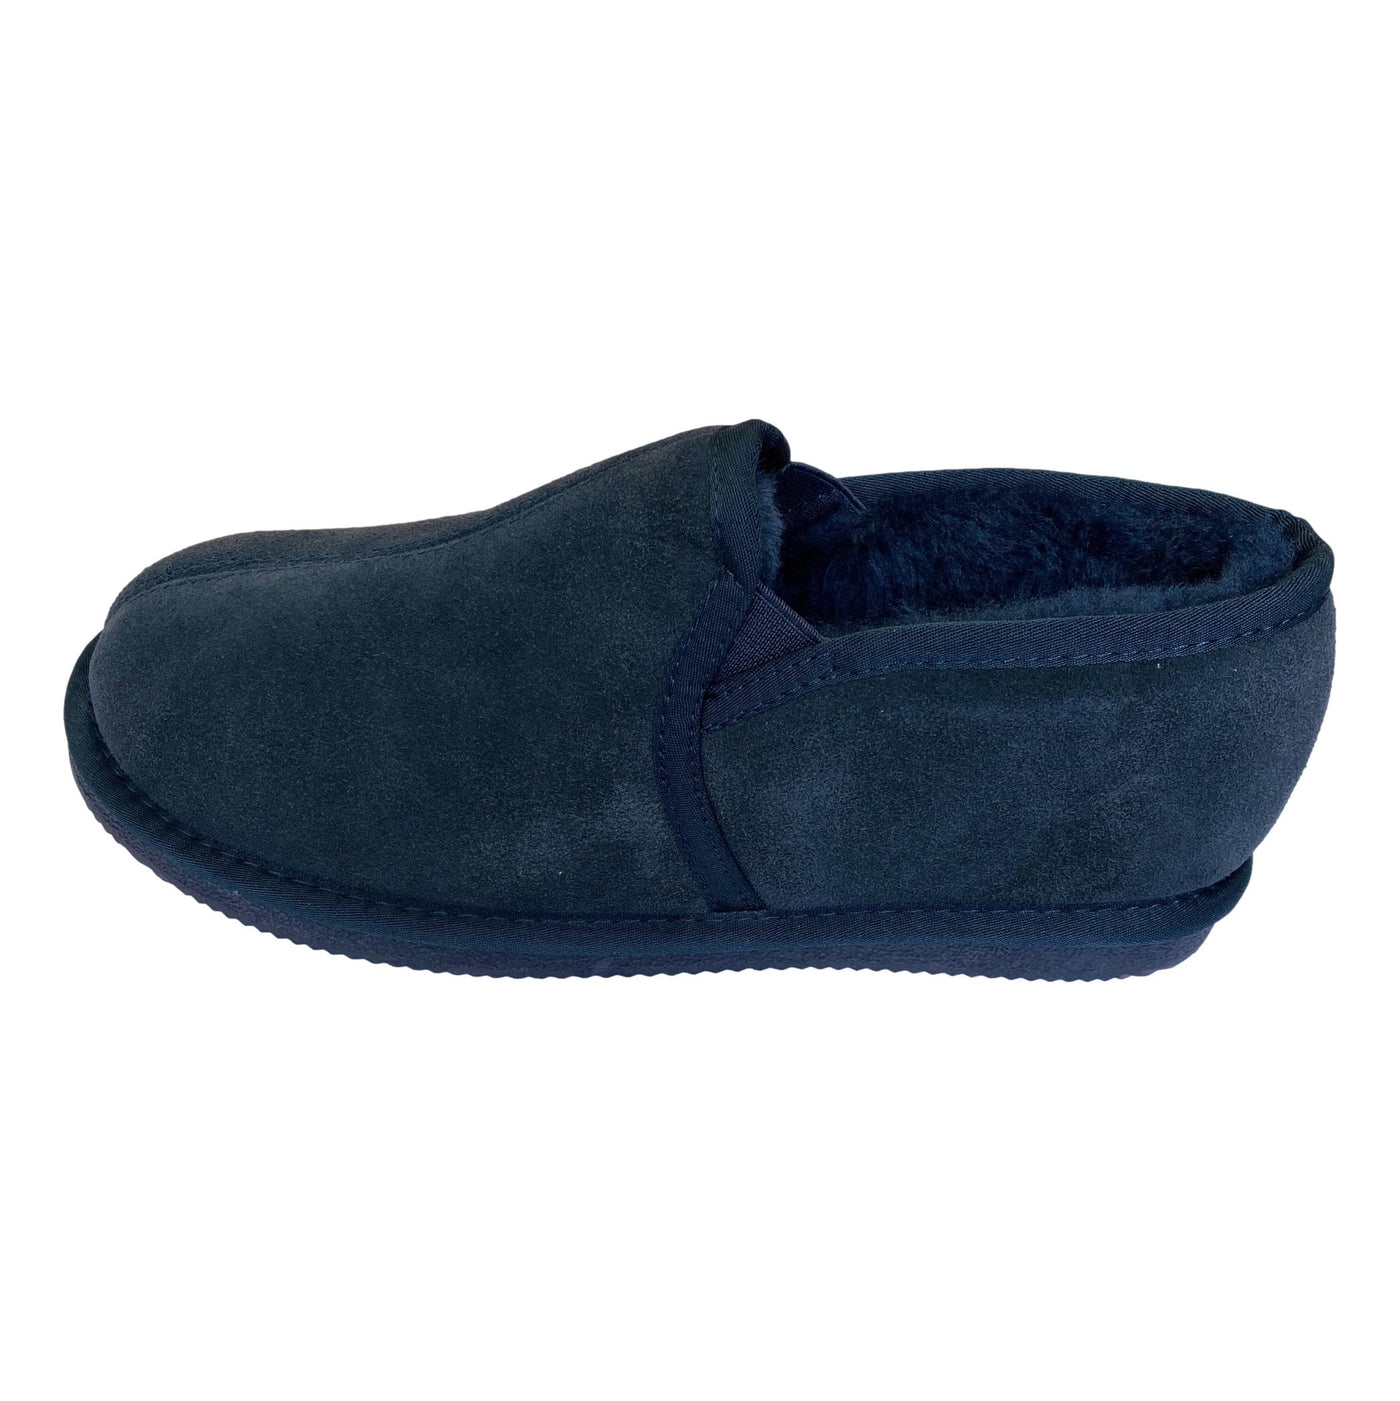 Deluxe Mens 'Sam' Sheepskin Slippers with Hard Sole - Navy